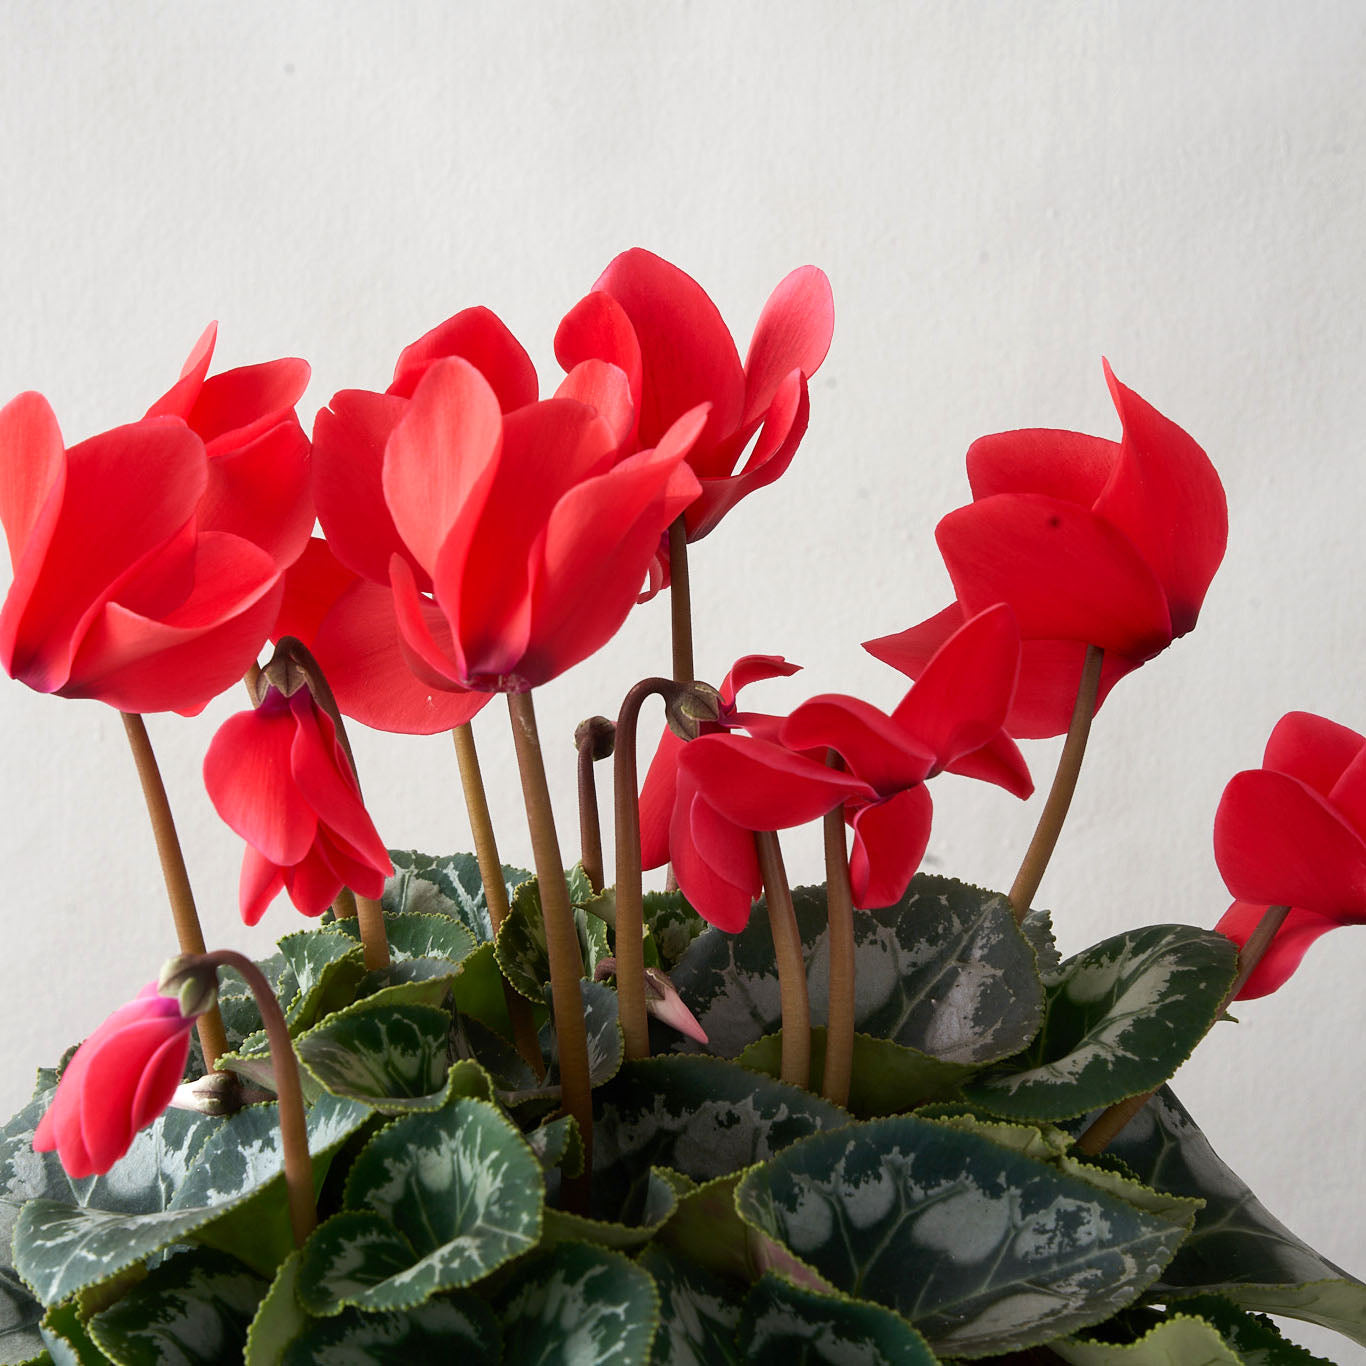 Closeup of red cyclamen plant.